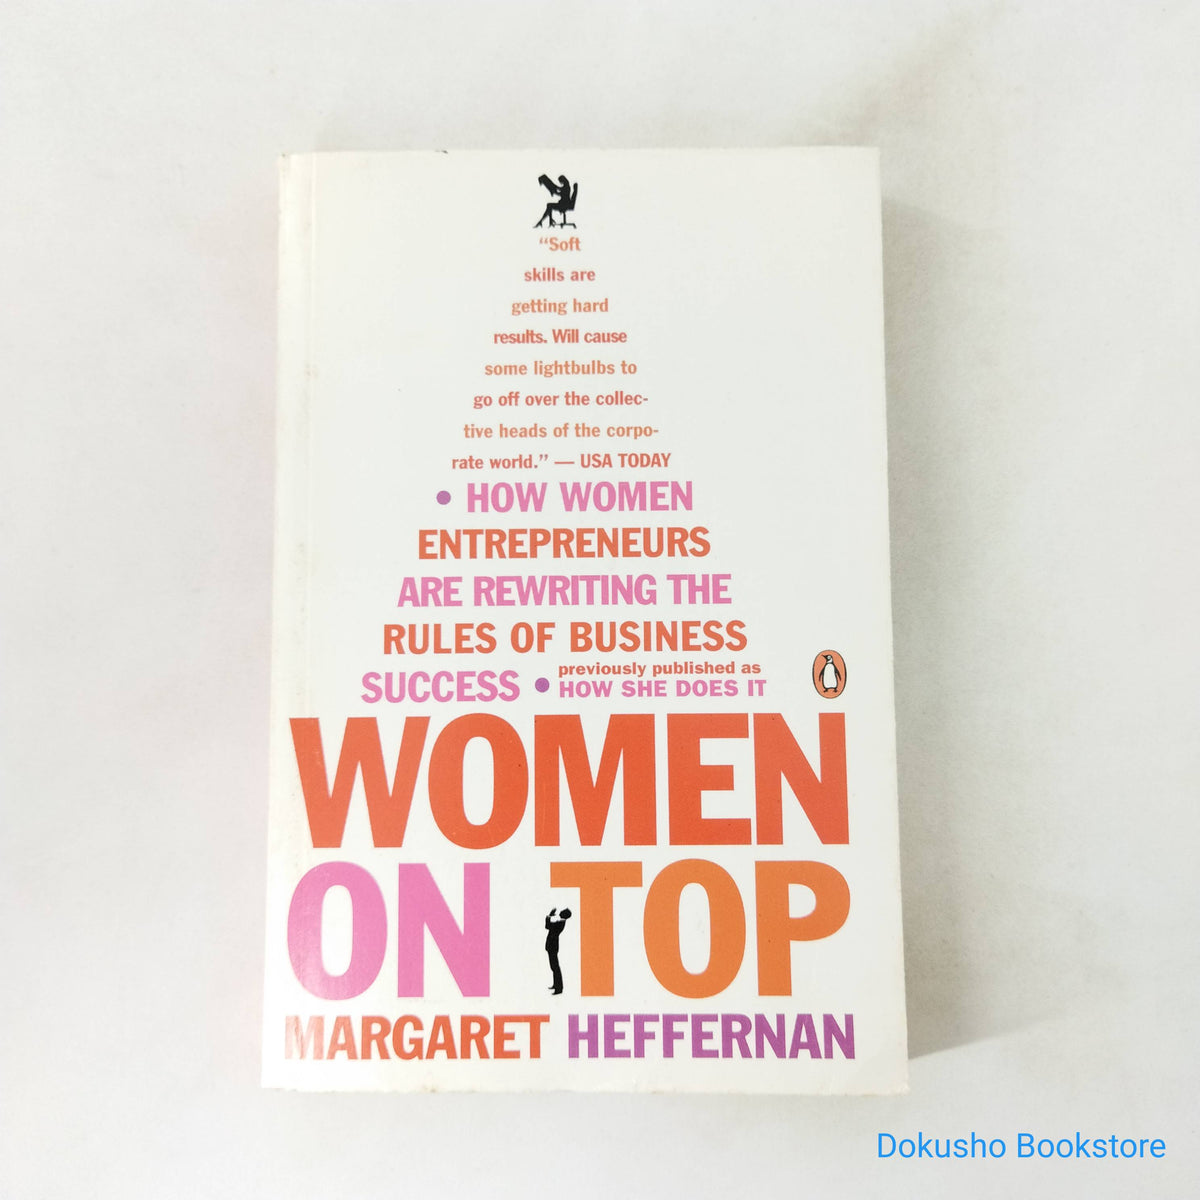 Women　the　Bookstore　–　Entrepreneurs　on　Second　Specialist　Top:　Rewriting　How　of　Dokusho　Busin　Women　Are　Rules　Malaysian　Hand　Book